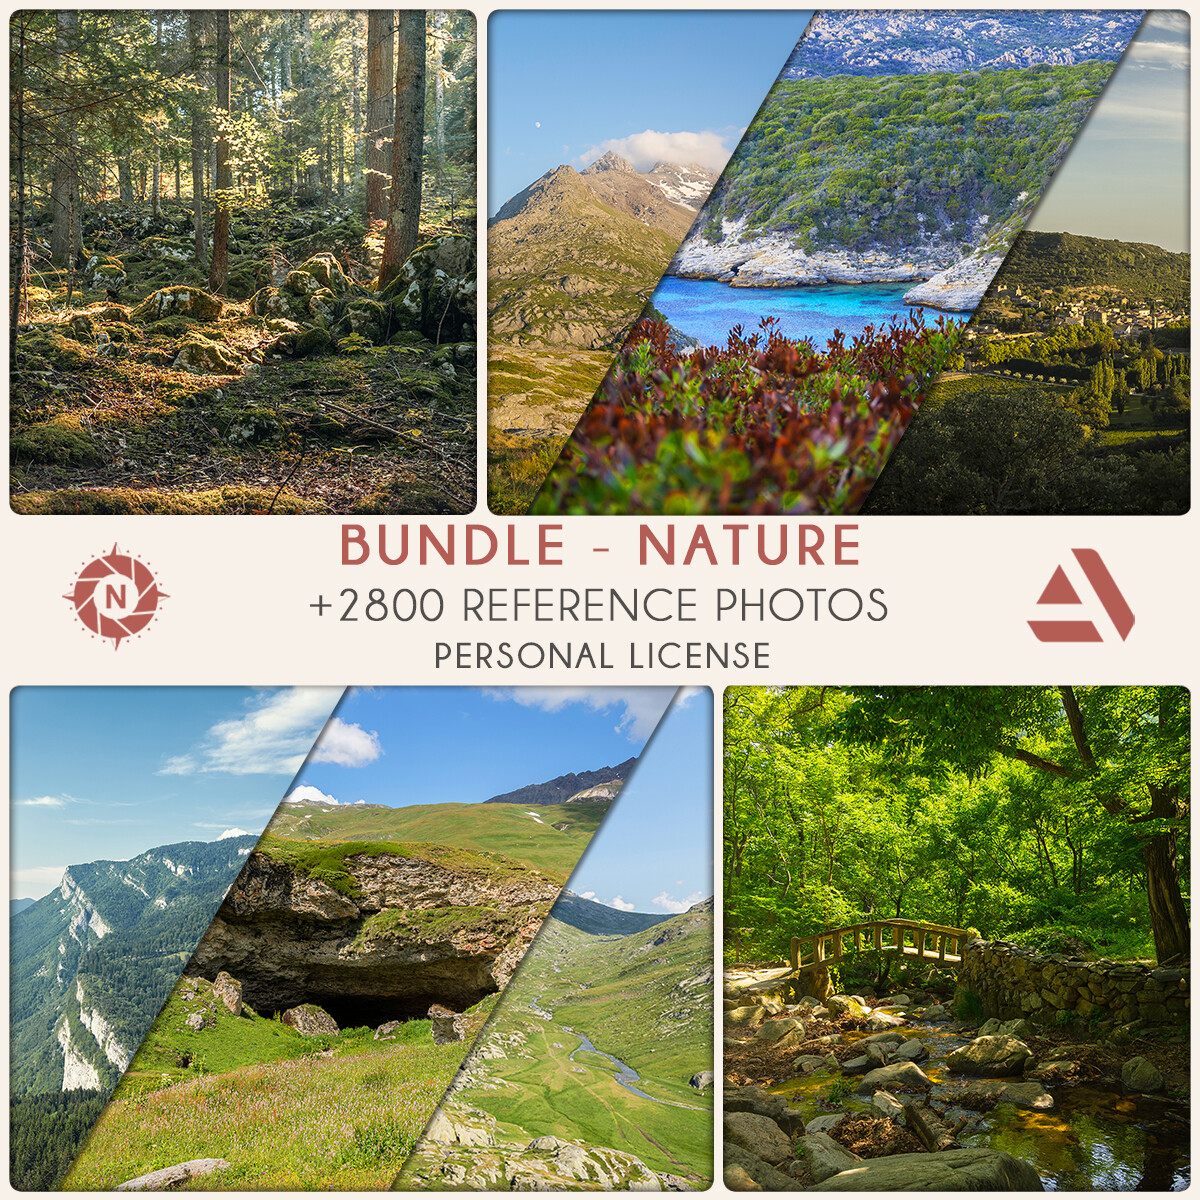 Bundle Reference Photos: Nature - Personal License

https://www.artstation.com/a/6588631